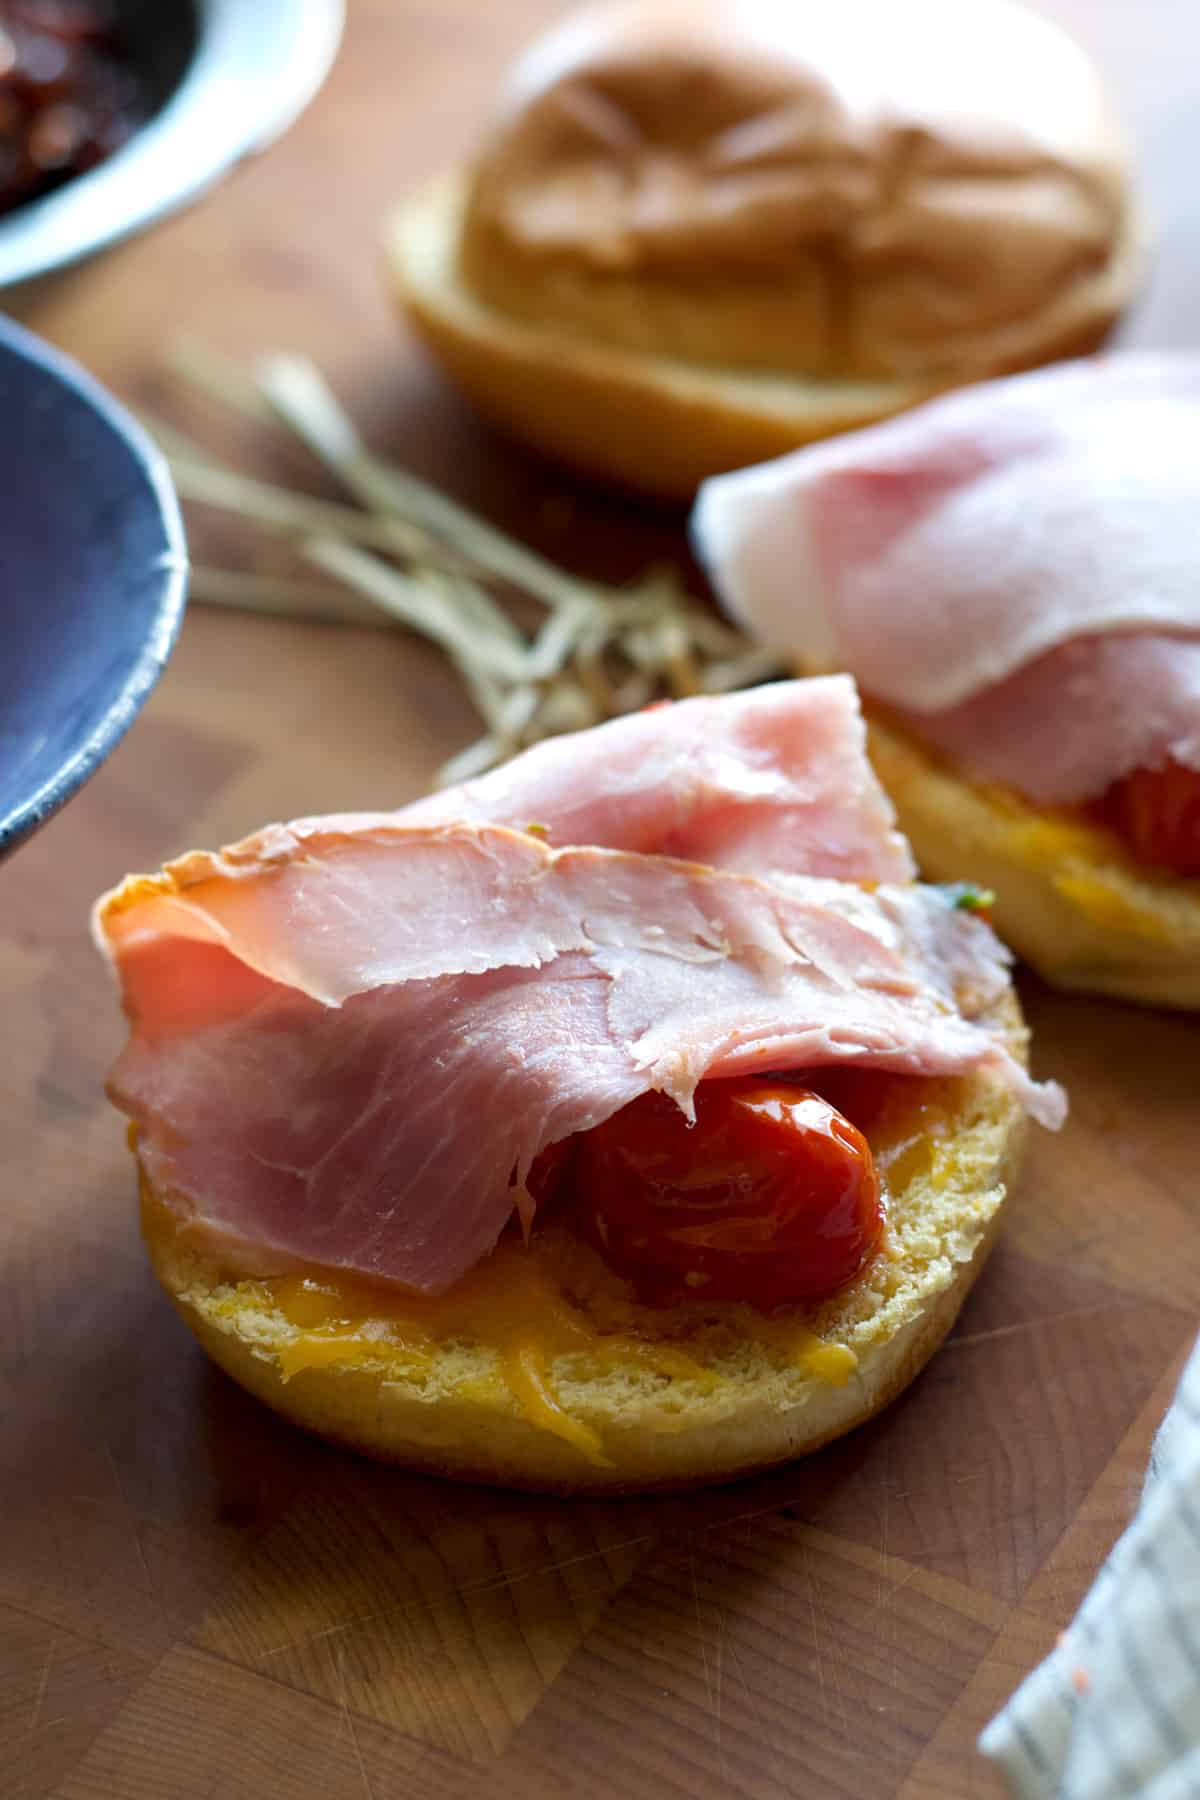 A half of a brioche bun with some tomato and a slice of ham on a table.